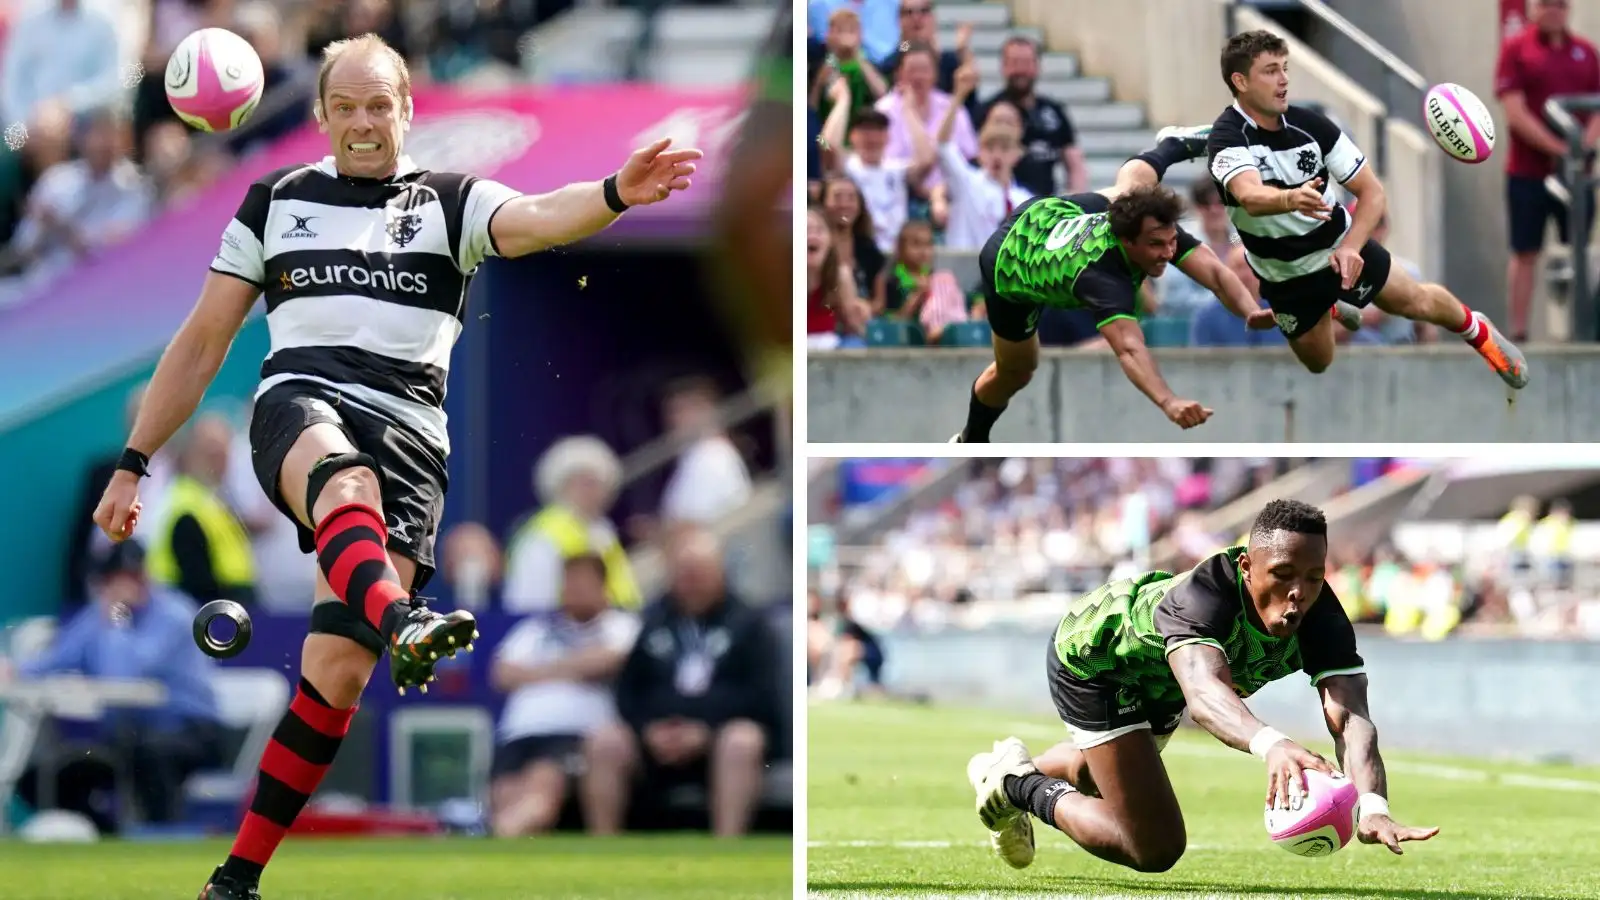 Alun Wyn Jones Following the Barbarians' 48-42 victory over World XV, here’s our five takeaways from the entertaining match at Twickenham on Sunday.